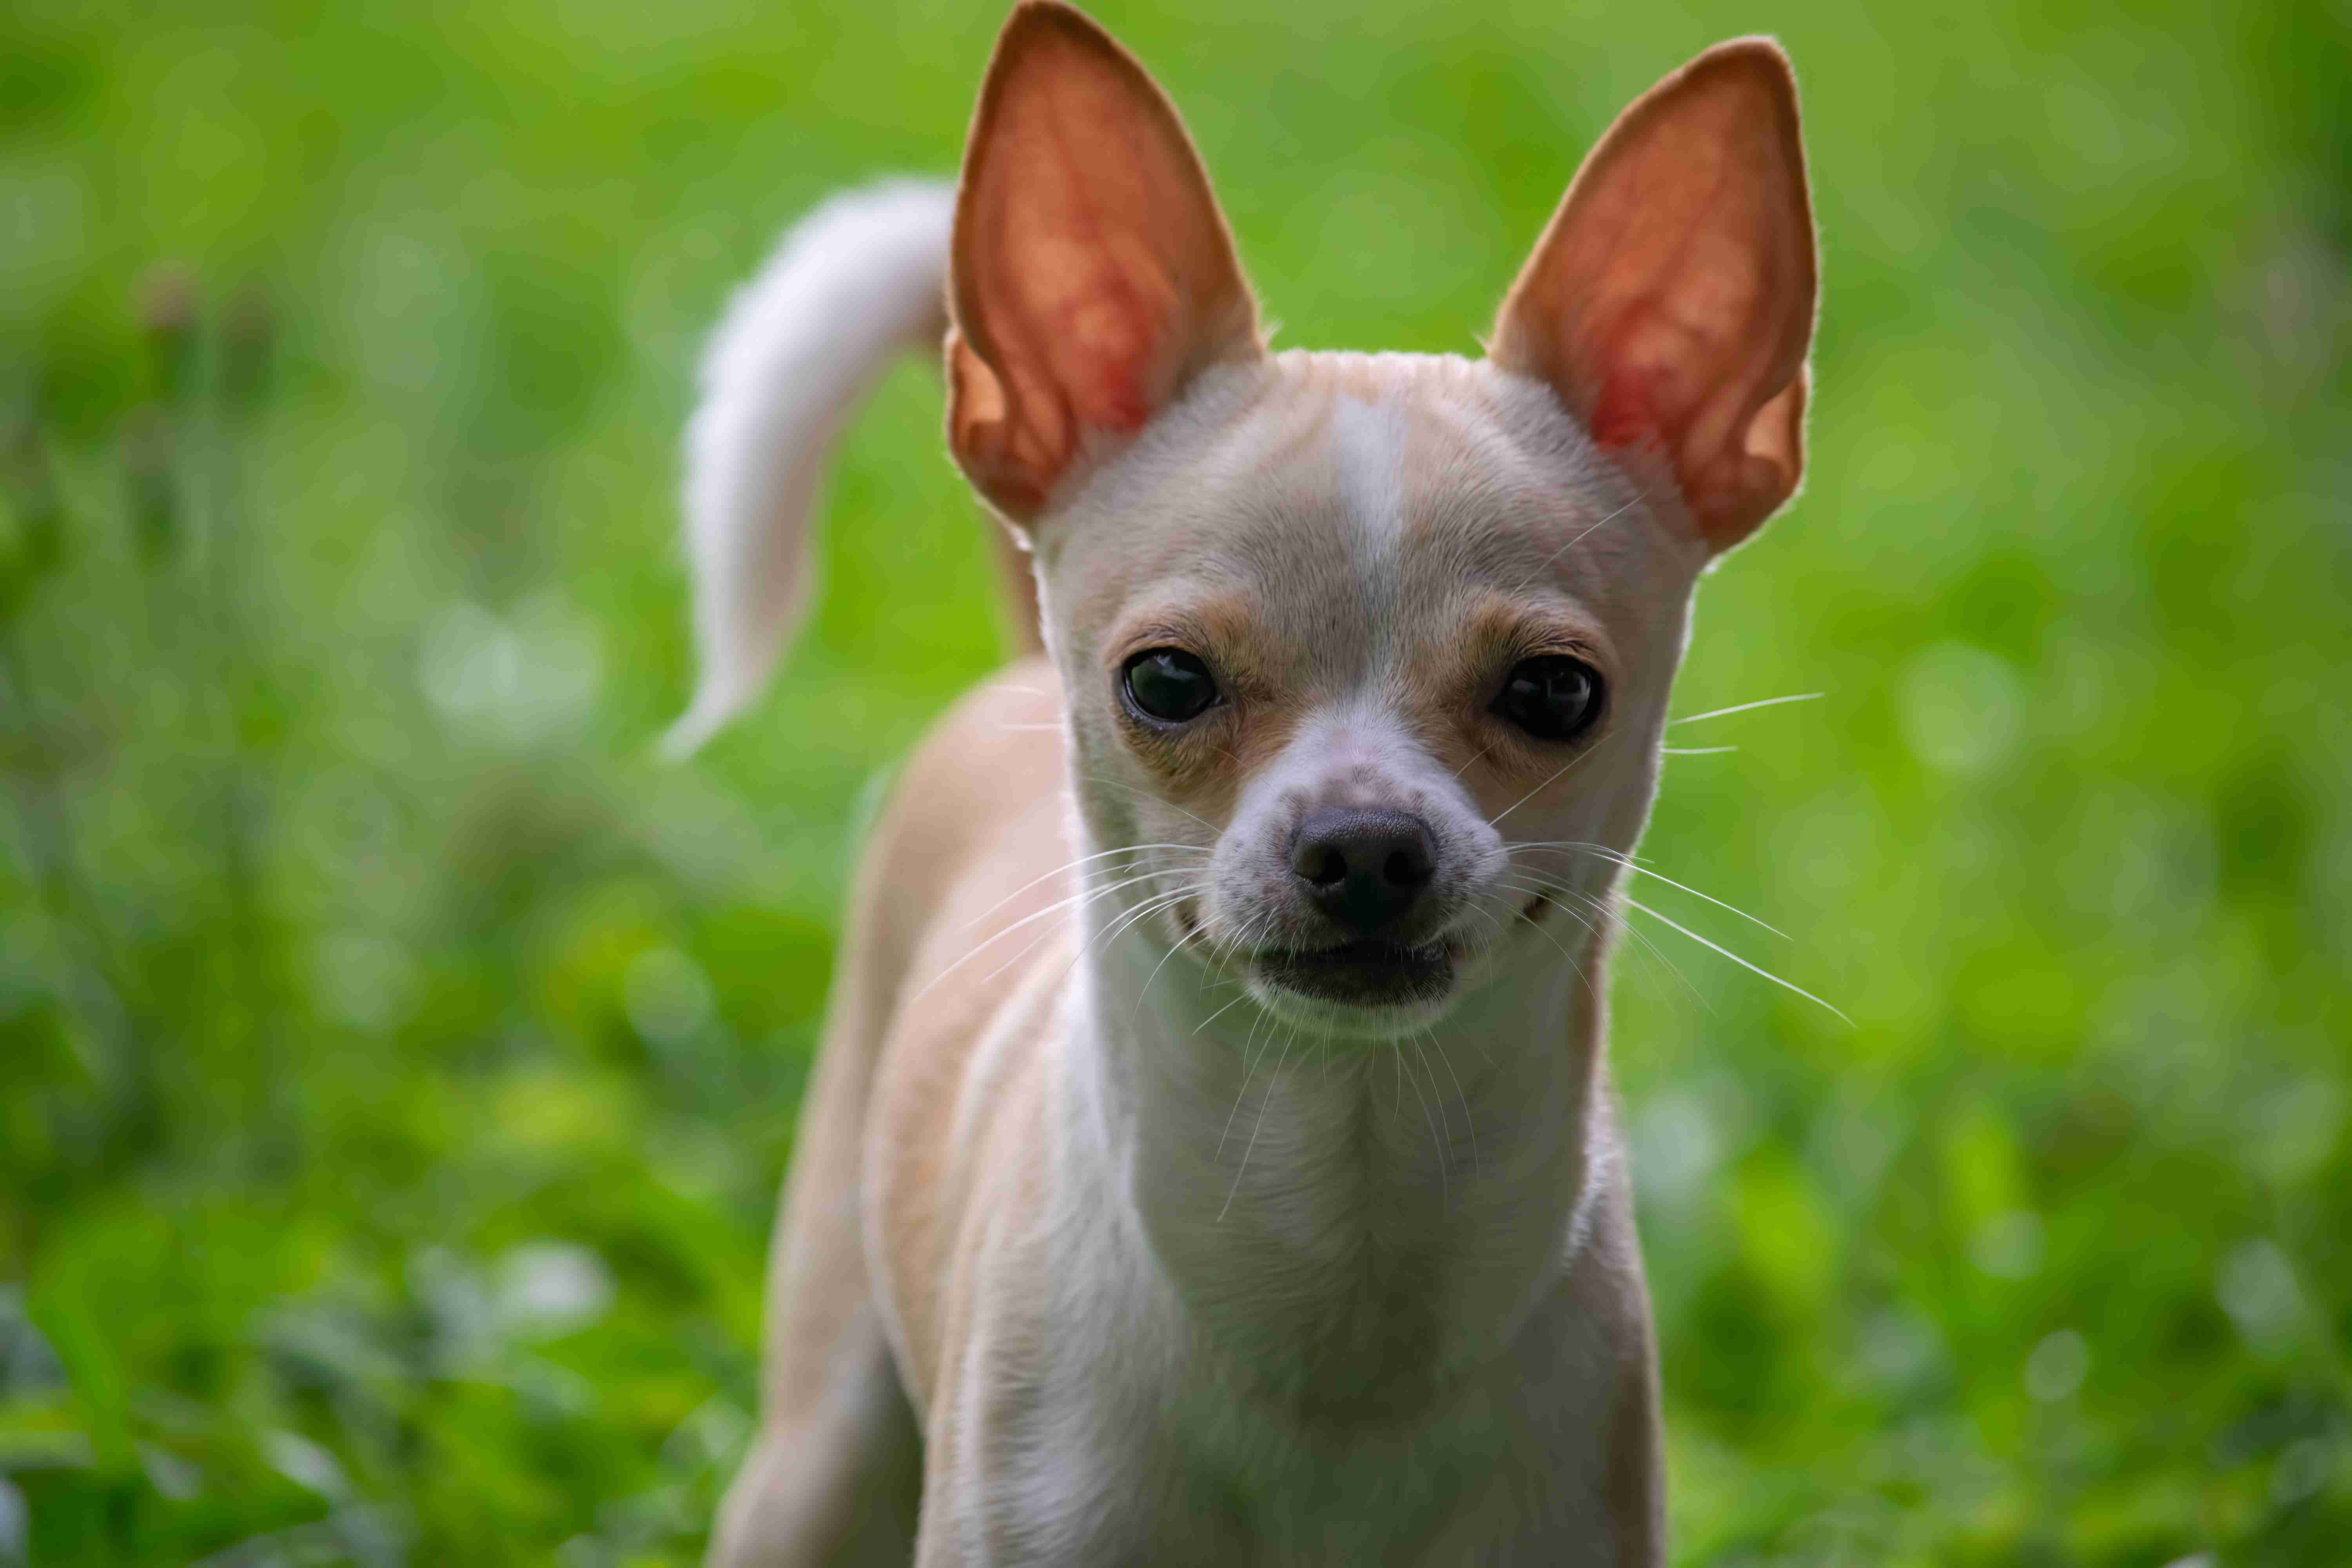 Can a Chihuahua's anger issues worsen with age if left unaddressed?